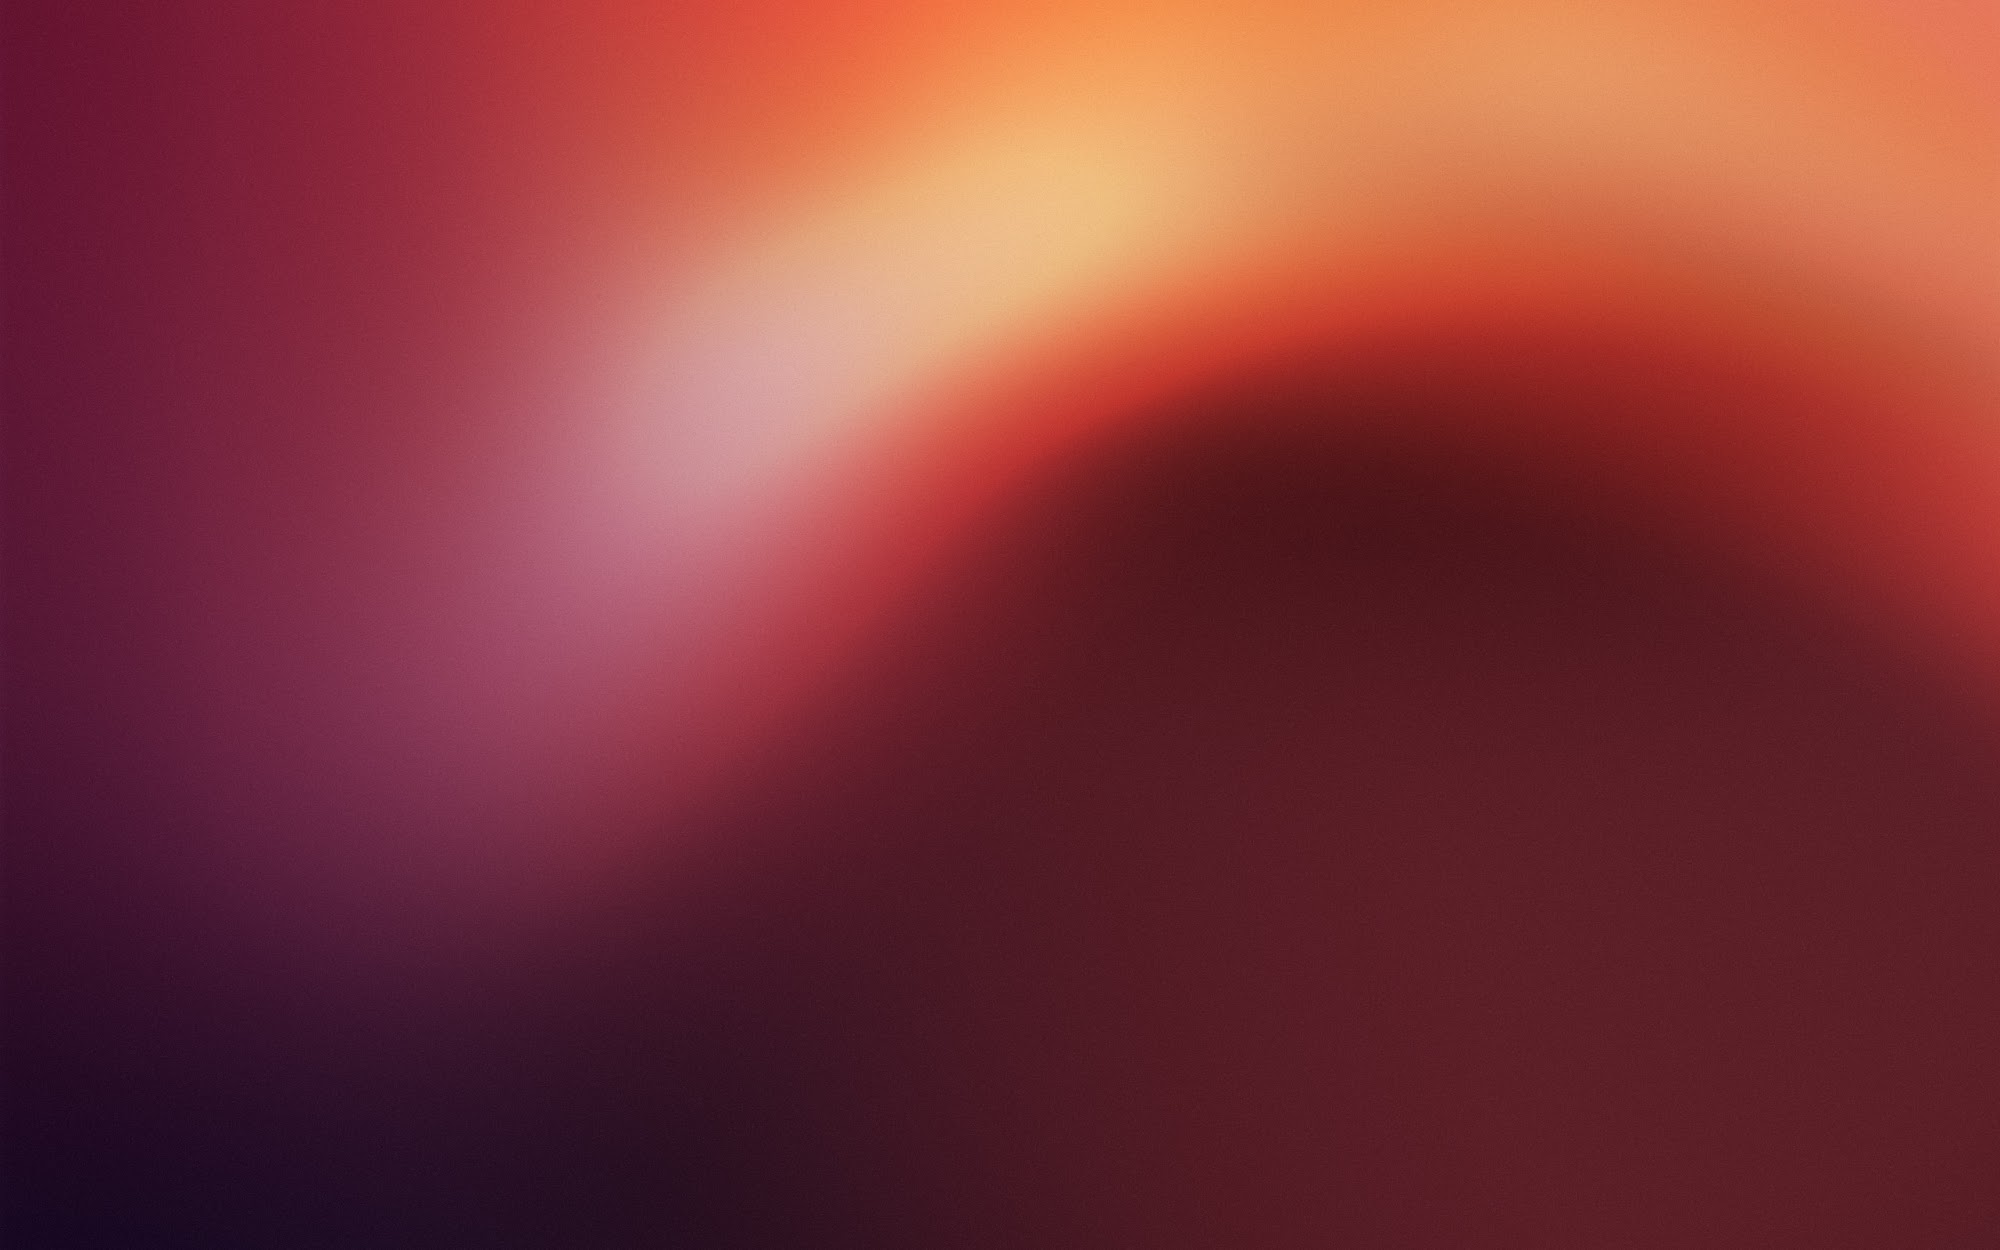 Can The Full Size Ubuntu Default Wallpaper From Here